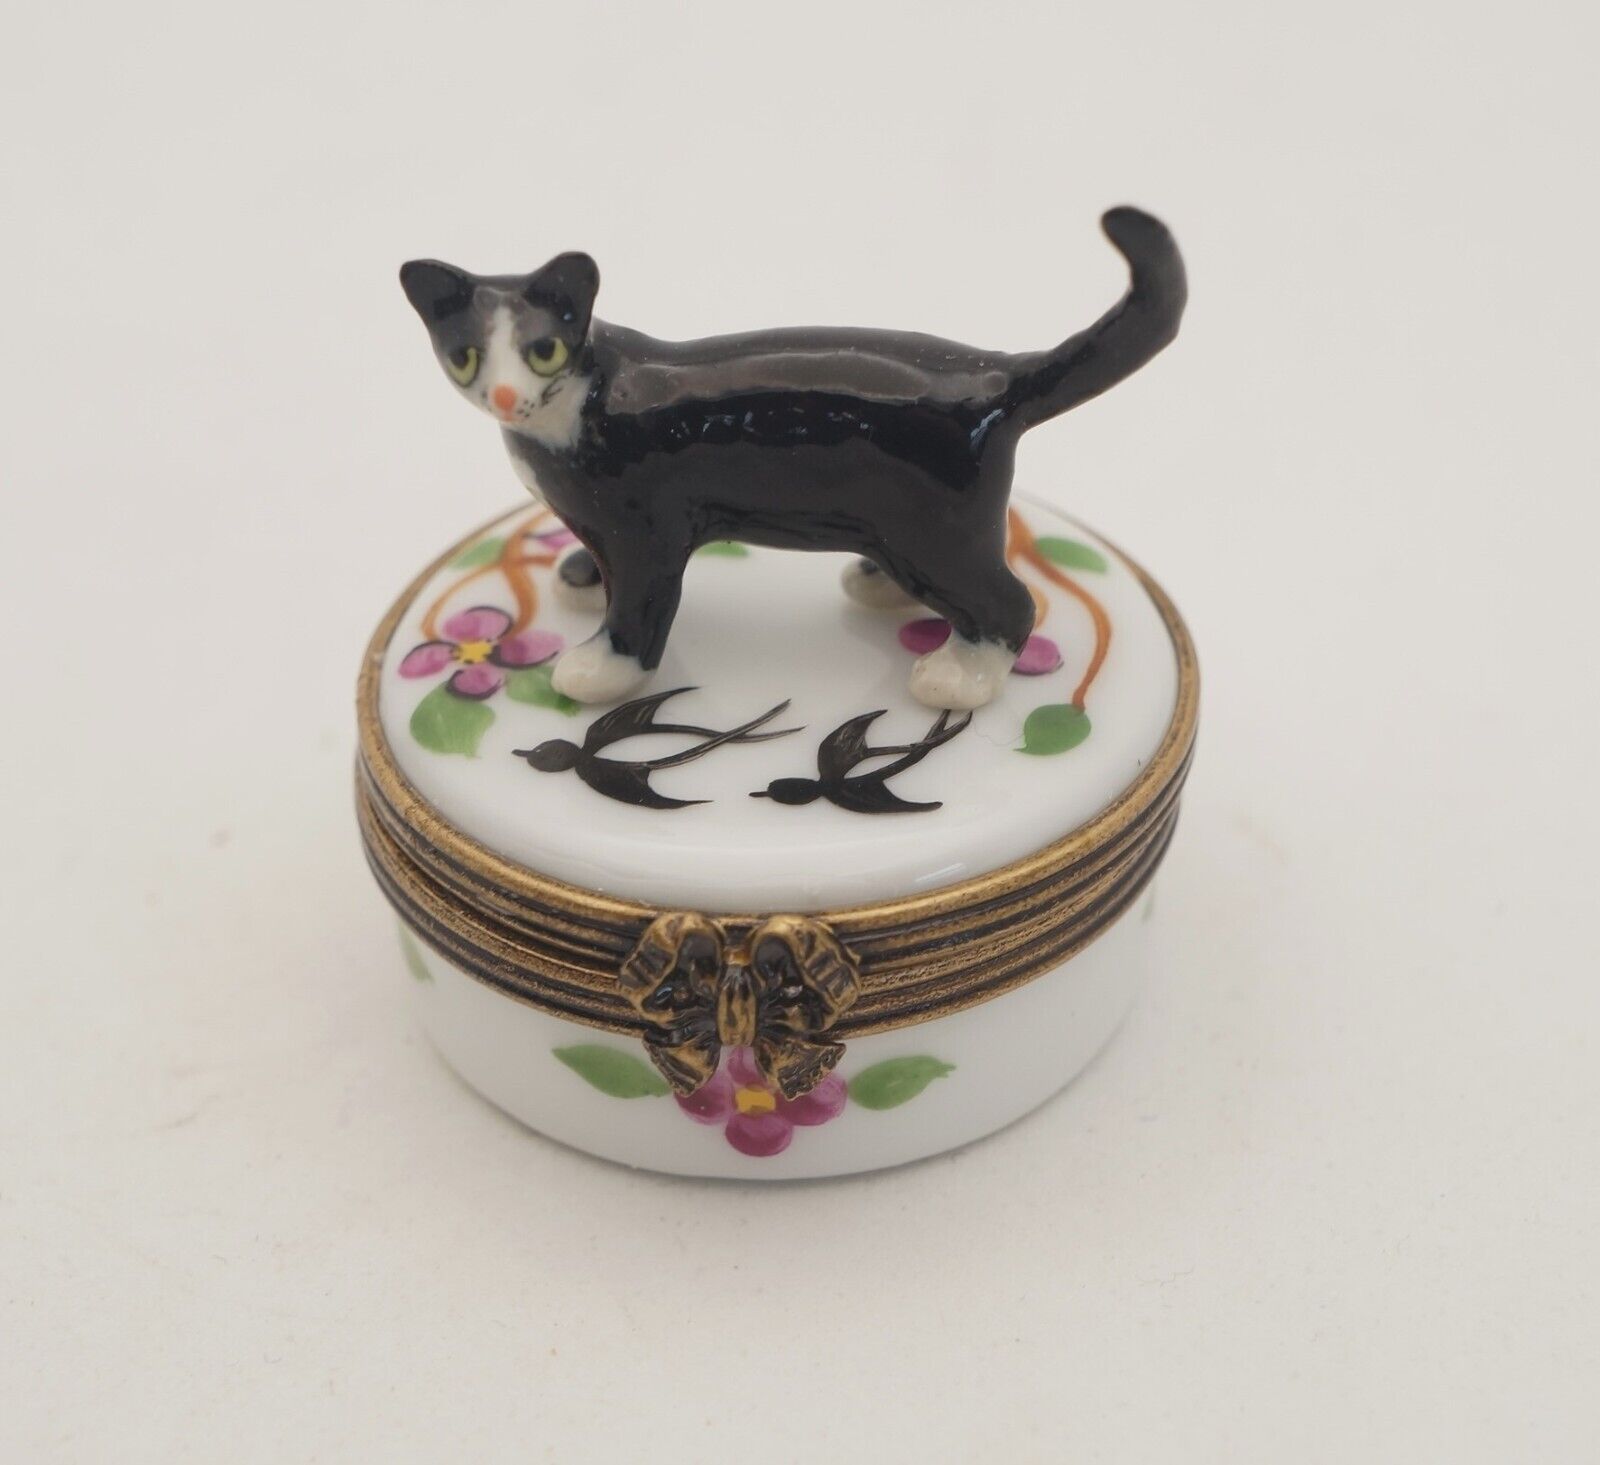 New French Limoges Trinket Box Black Tuxedo Kitty Cat on Floral Box with Birds